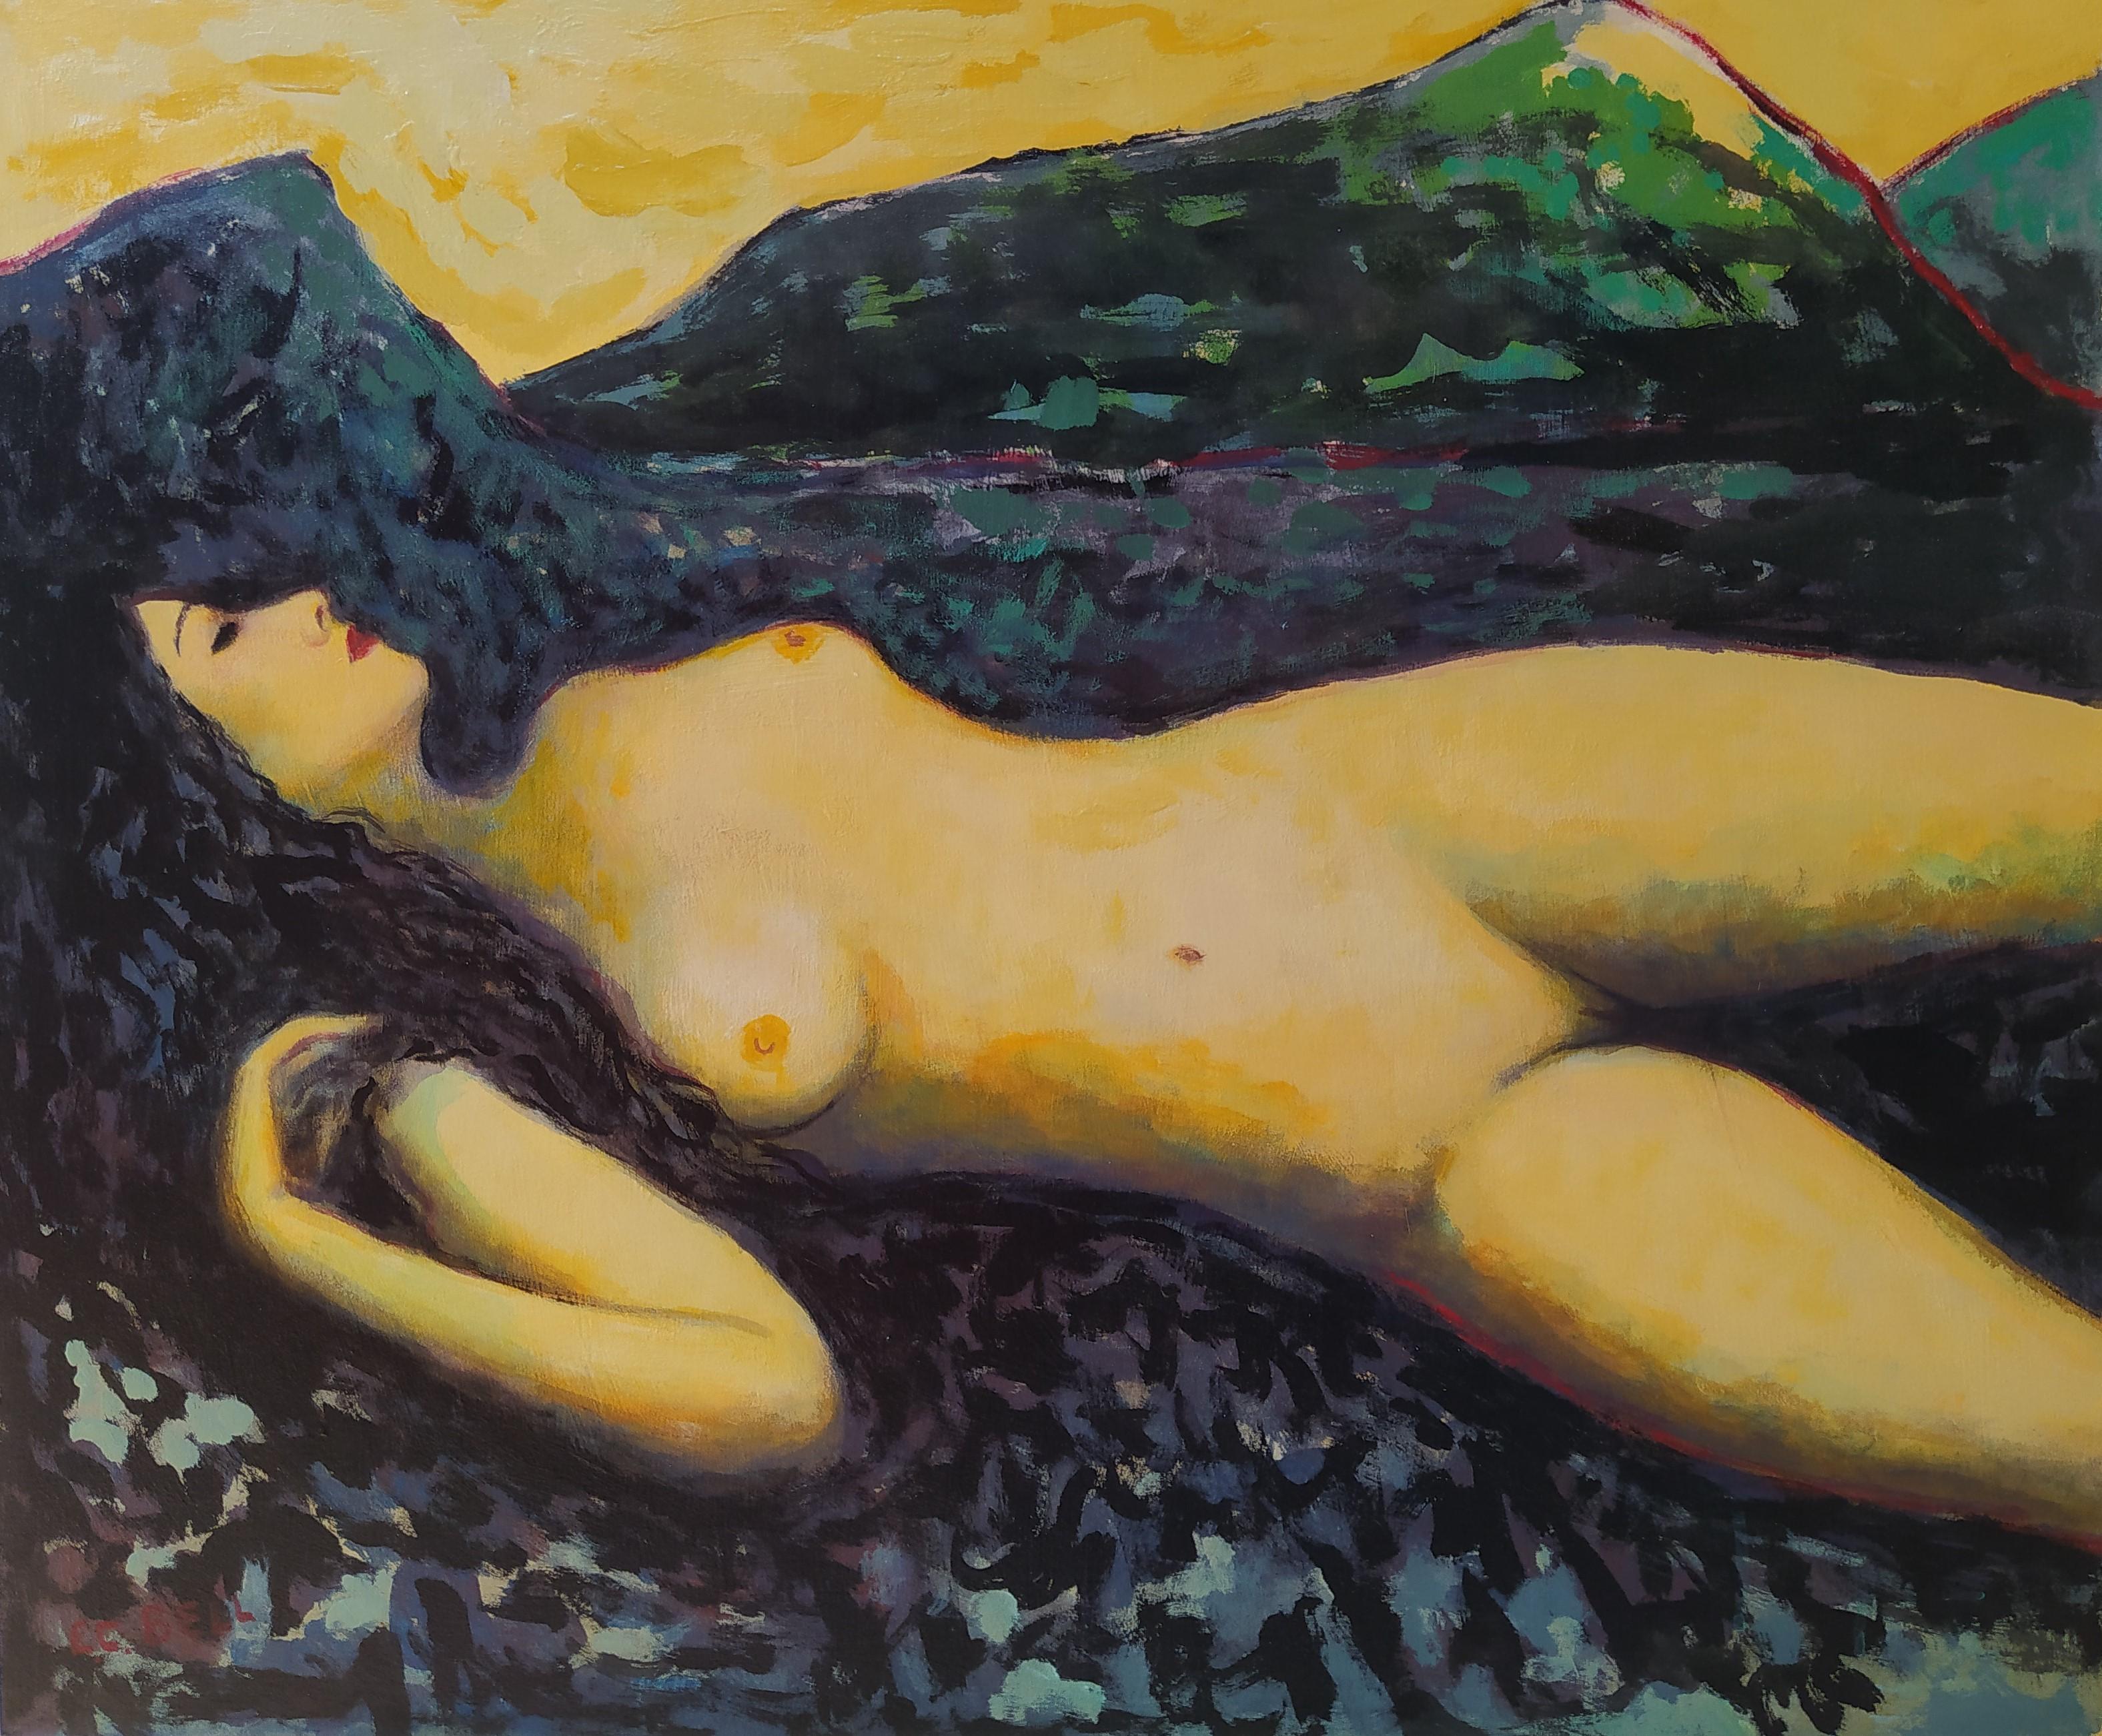 E.C. Bell Figurative Painting - "Flatlander"- Horizontal expressionist female nude with landscape in background.